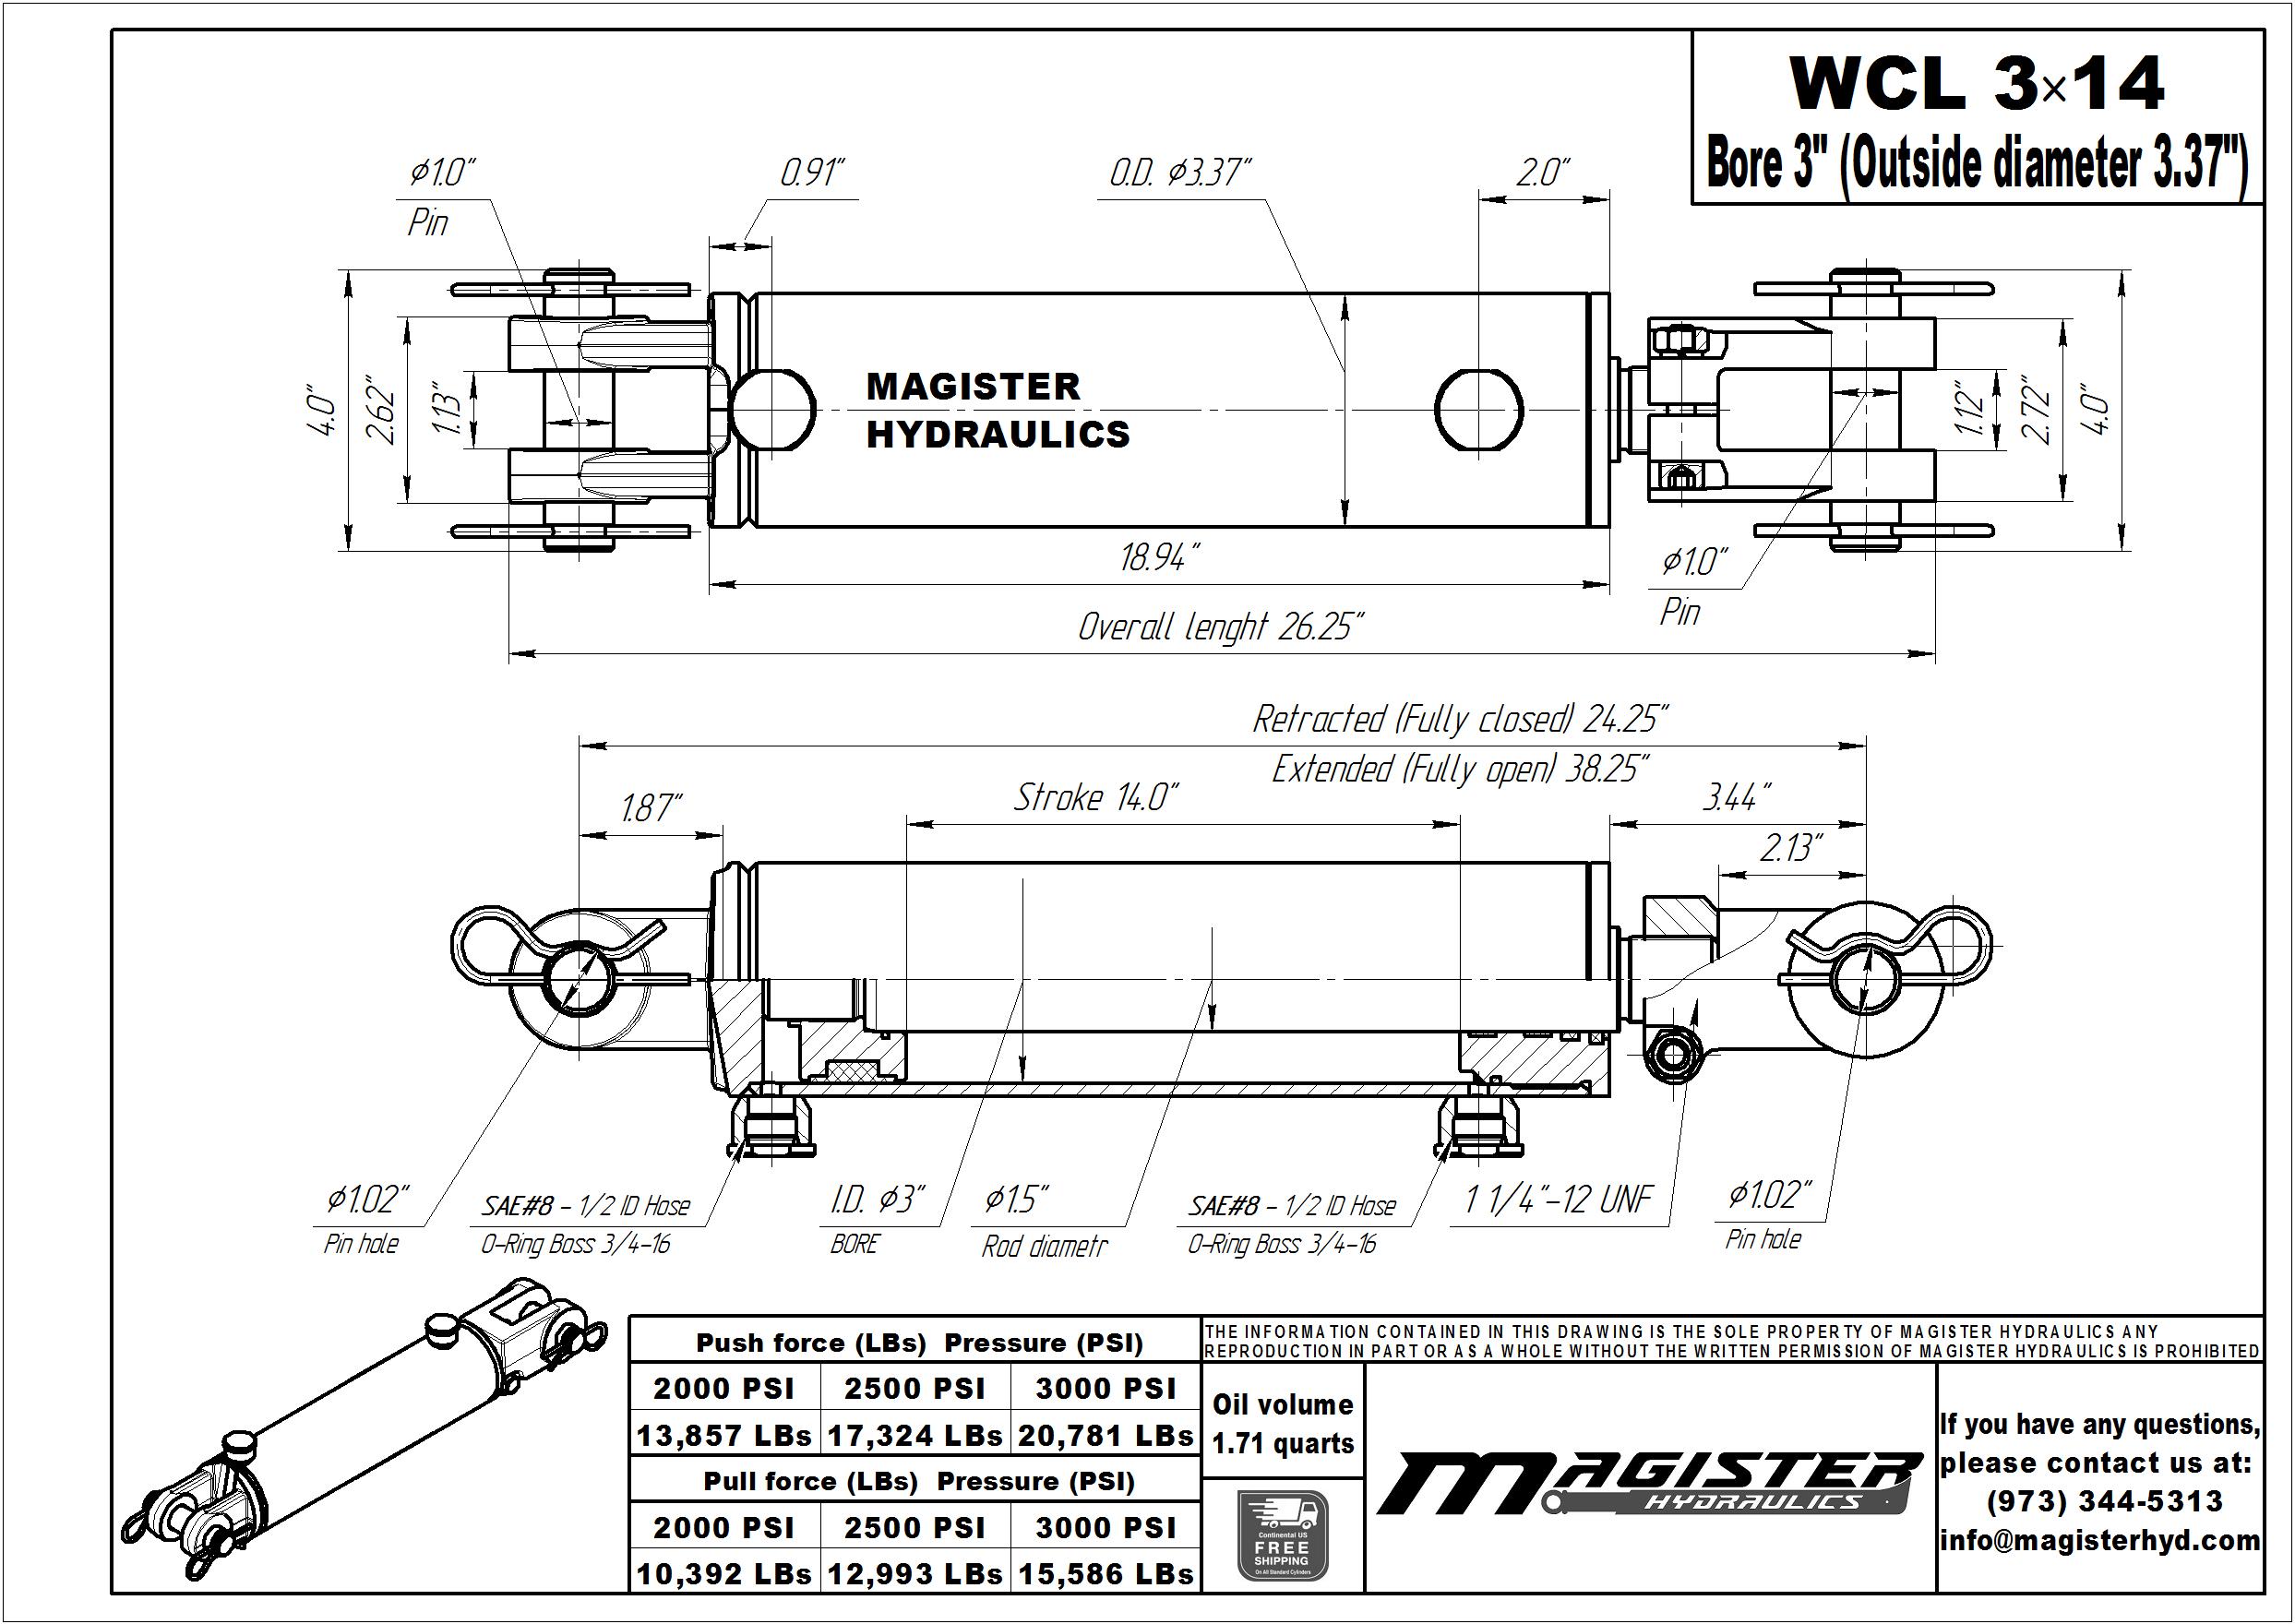 3 bore x 14 stroke hydraulic cylinder, welded clevis double acting cylinder | Magister Hydraulics